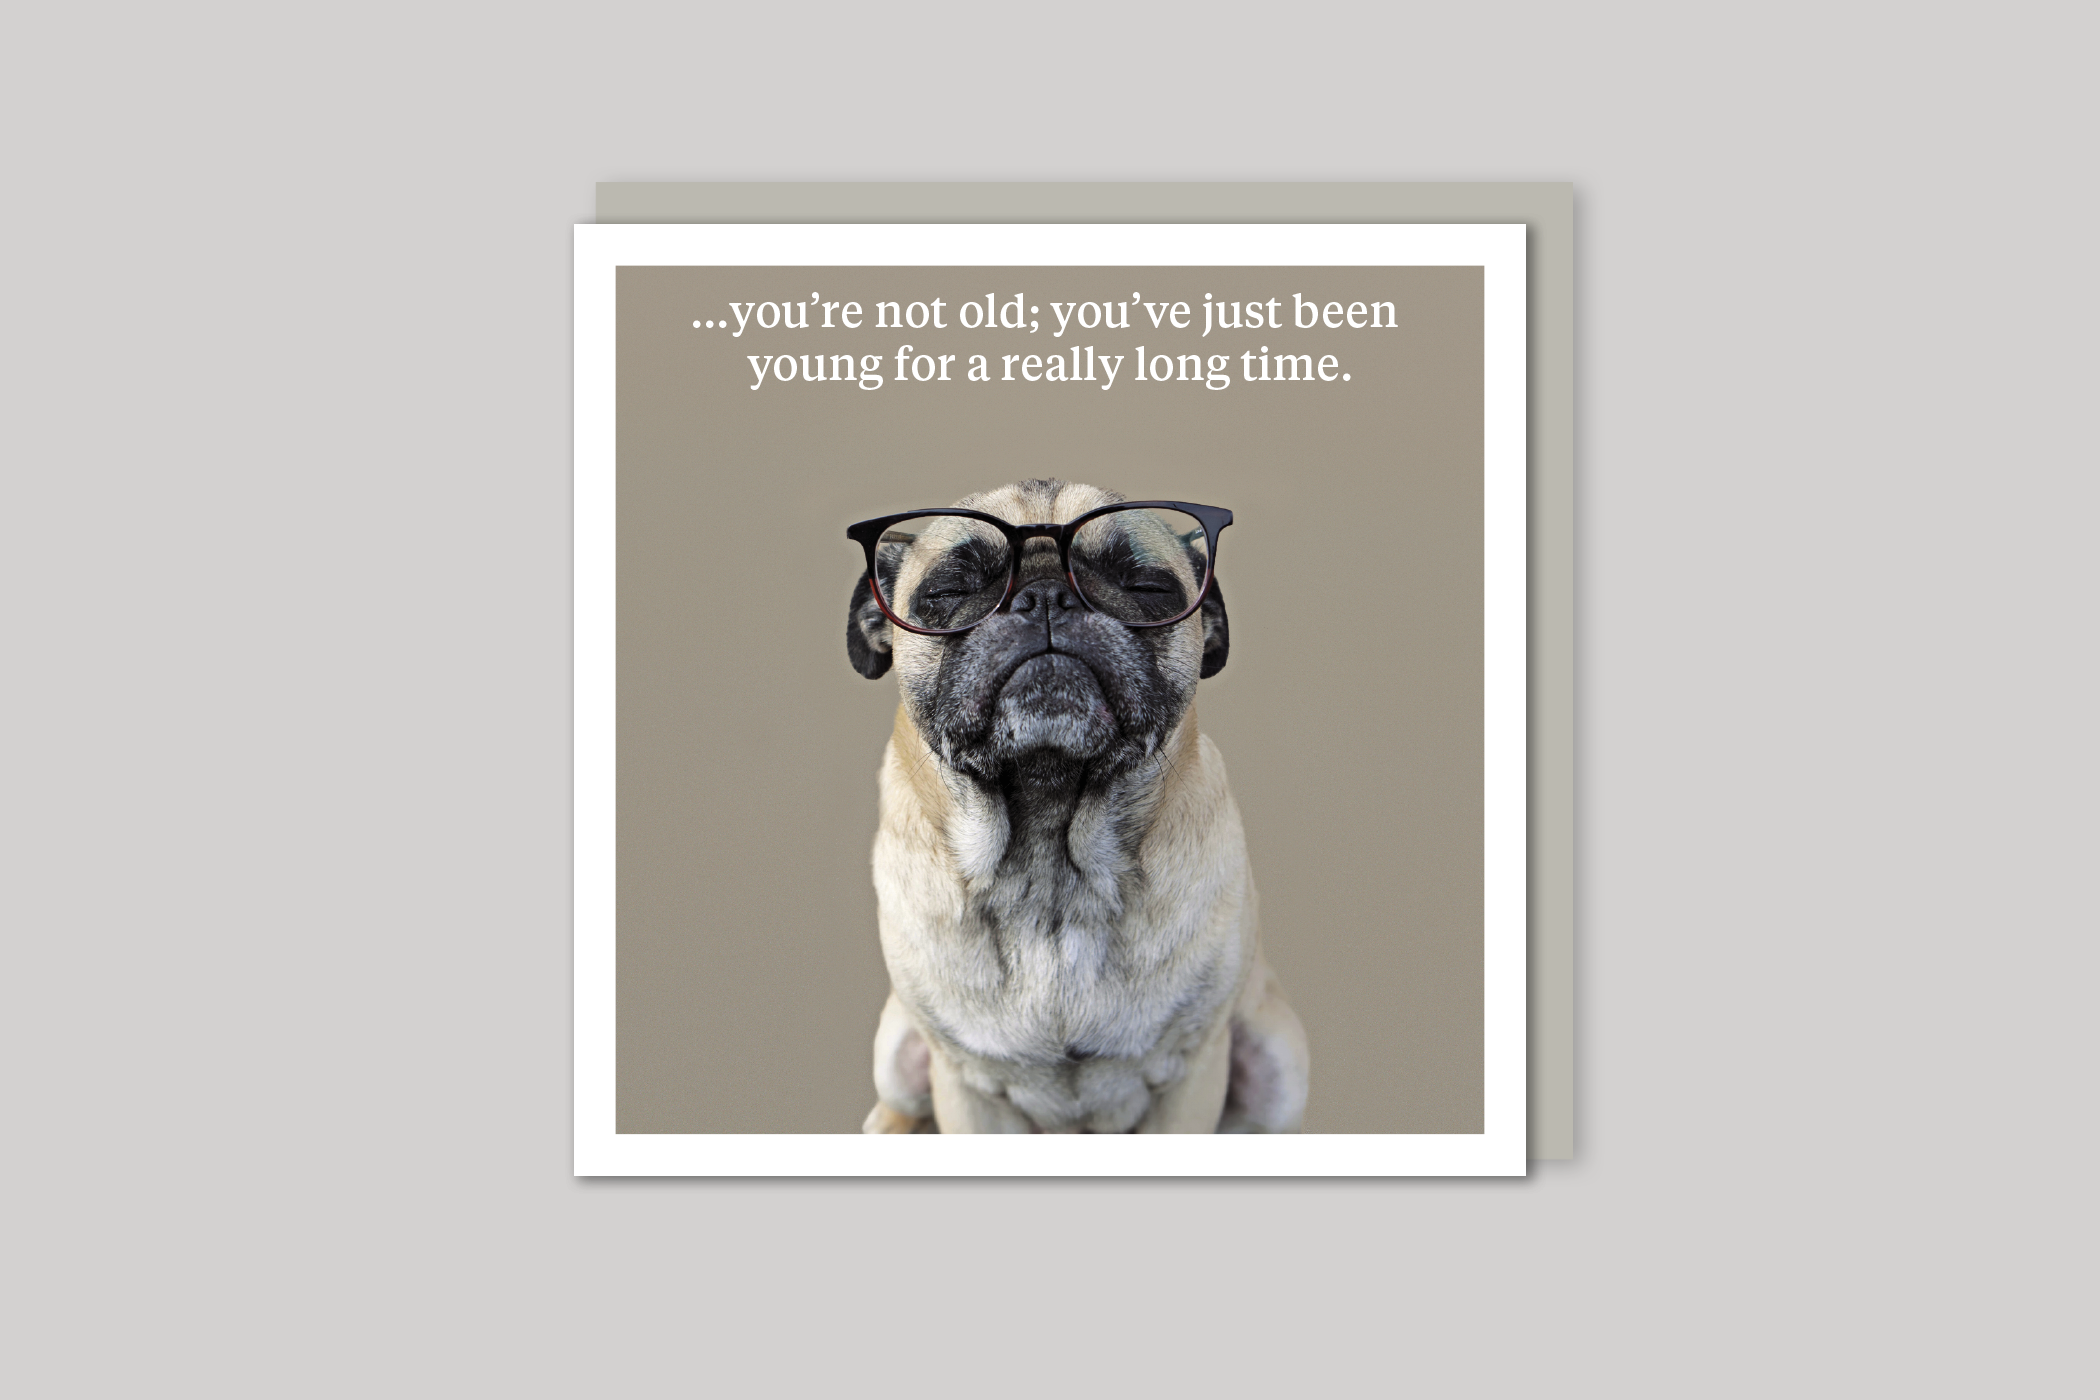 You're Not Old quirky animal portrait from Curious World range of greeting cards by Icon, back page.